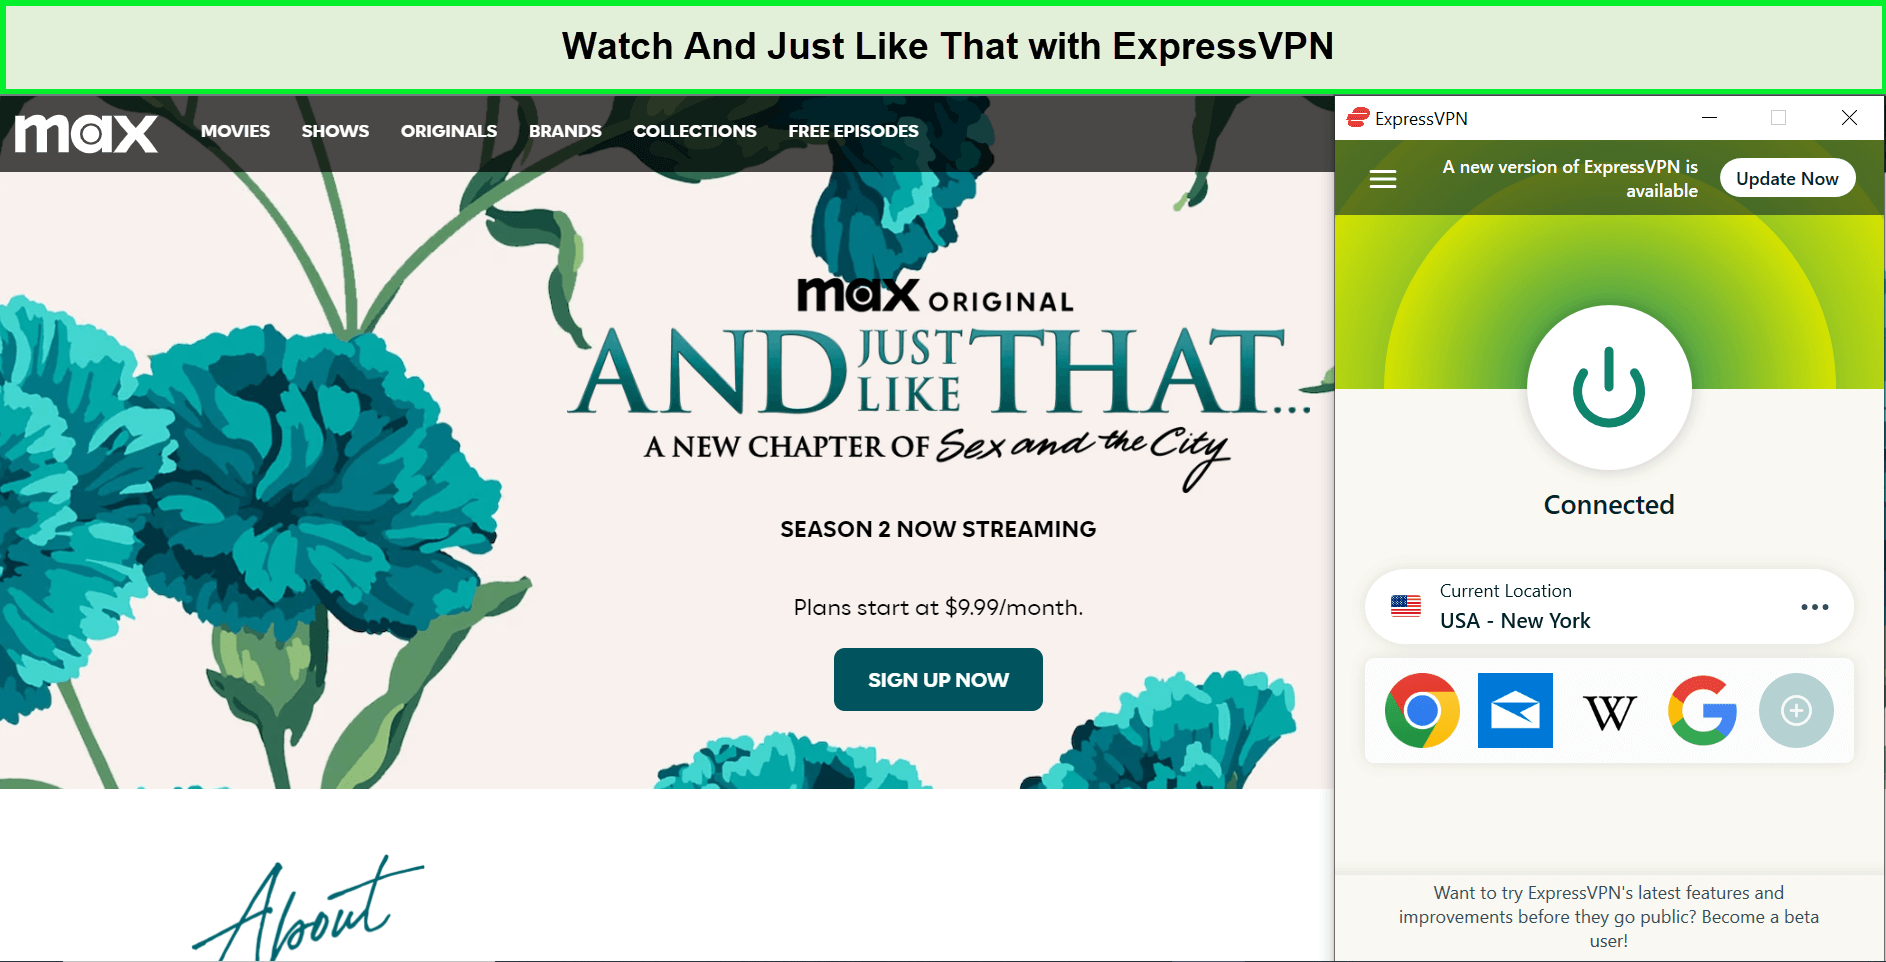 Watch-And-Just-Like-That-Season-2-New-Episodes-outside-USA-with-ExpressVPN